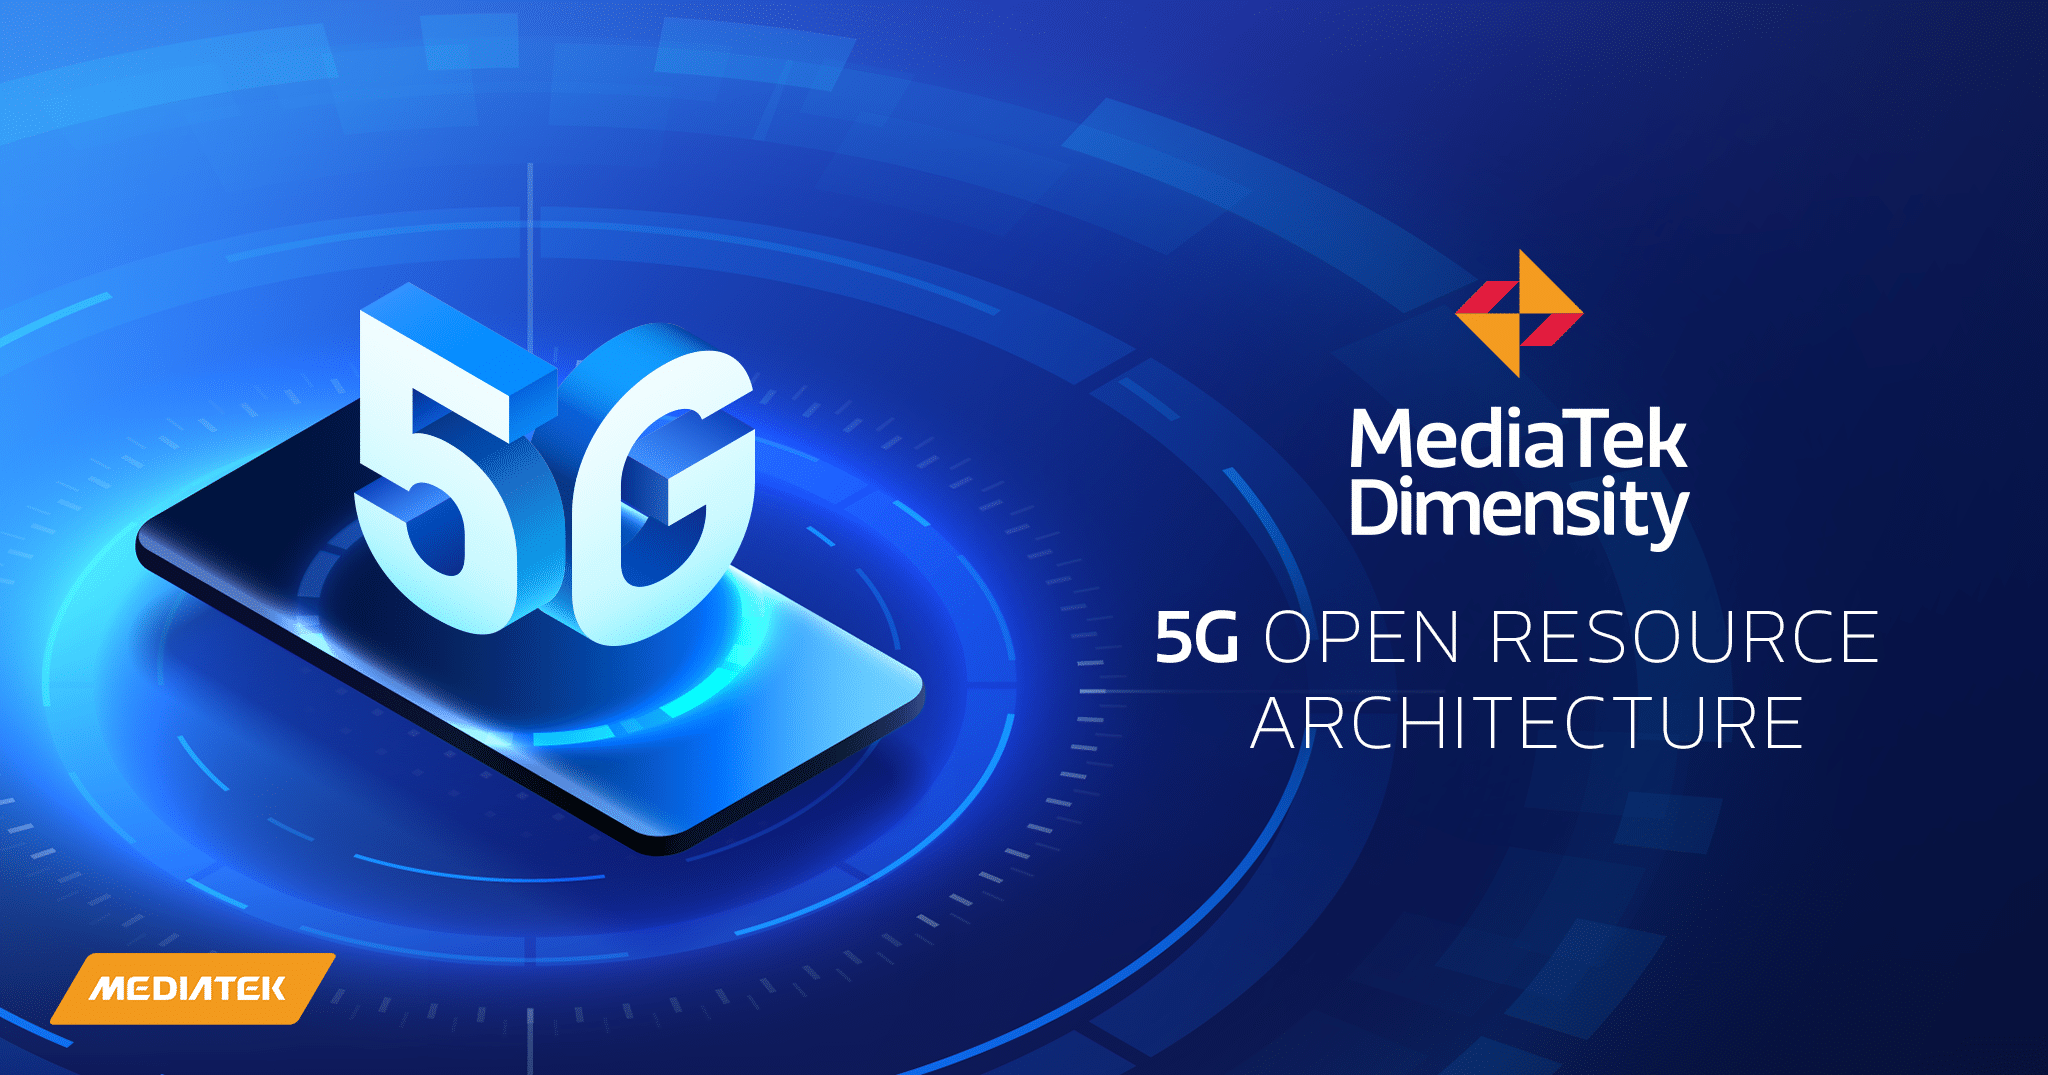 MediaTek’s New Dimensity 5G Open Resource Architecture Allows Designers to Customize